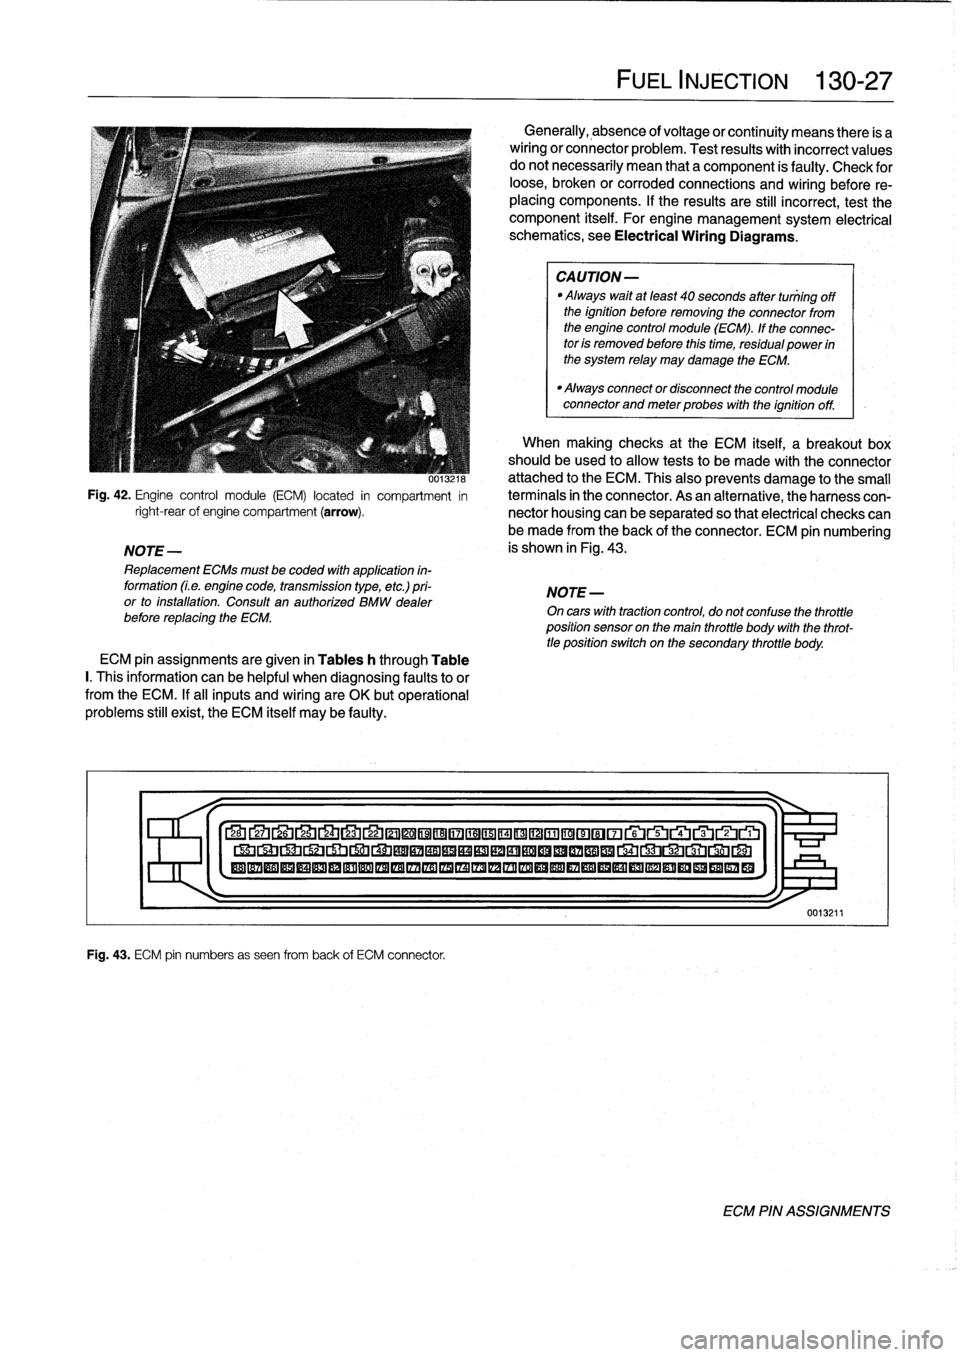 BMW 323i 1995 E36 Workshop Manual 
0013ZIM
Fig
.
42
.
Engine
control
module
(ECM)
located
in
compartment
in
right-rearof
engine
compartment
(arrow)
.

NOTE-

Replacement
ECMs
must
be
coded
with
application
in-
formation
(Le
.
engine
c